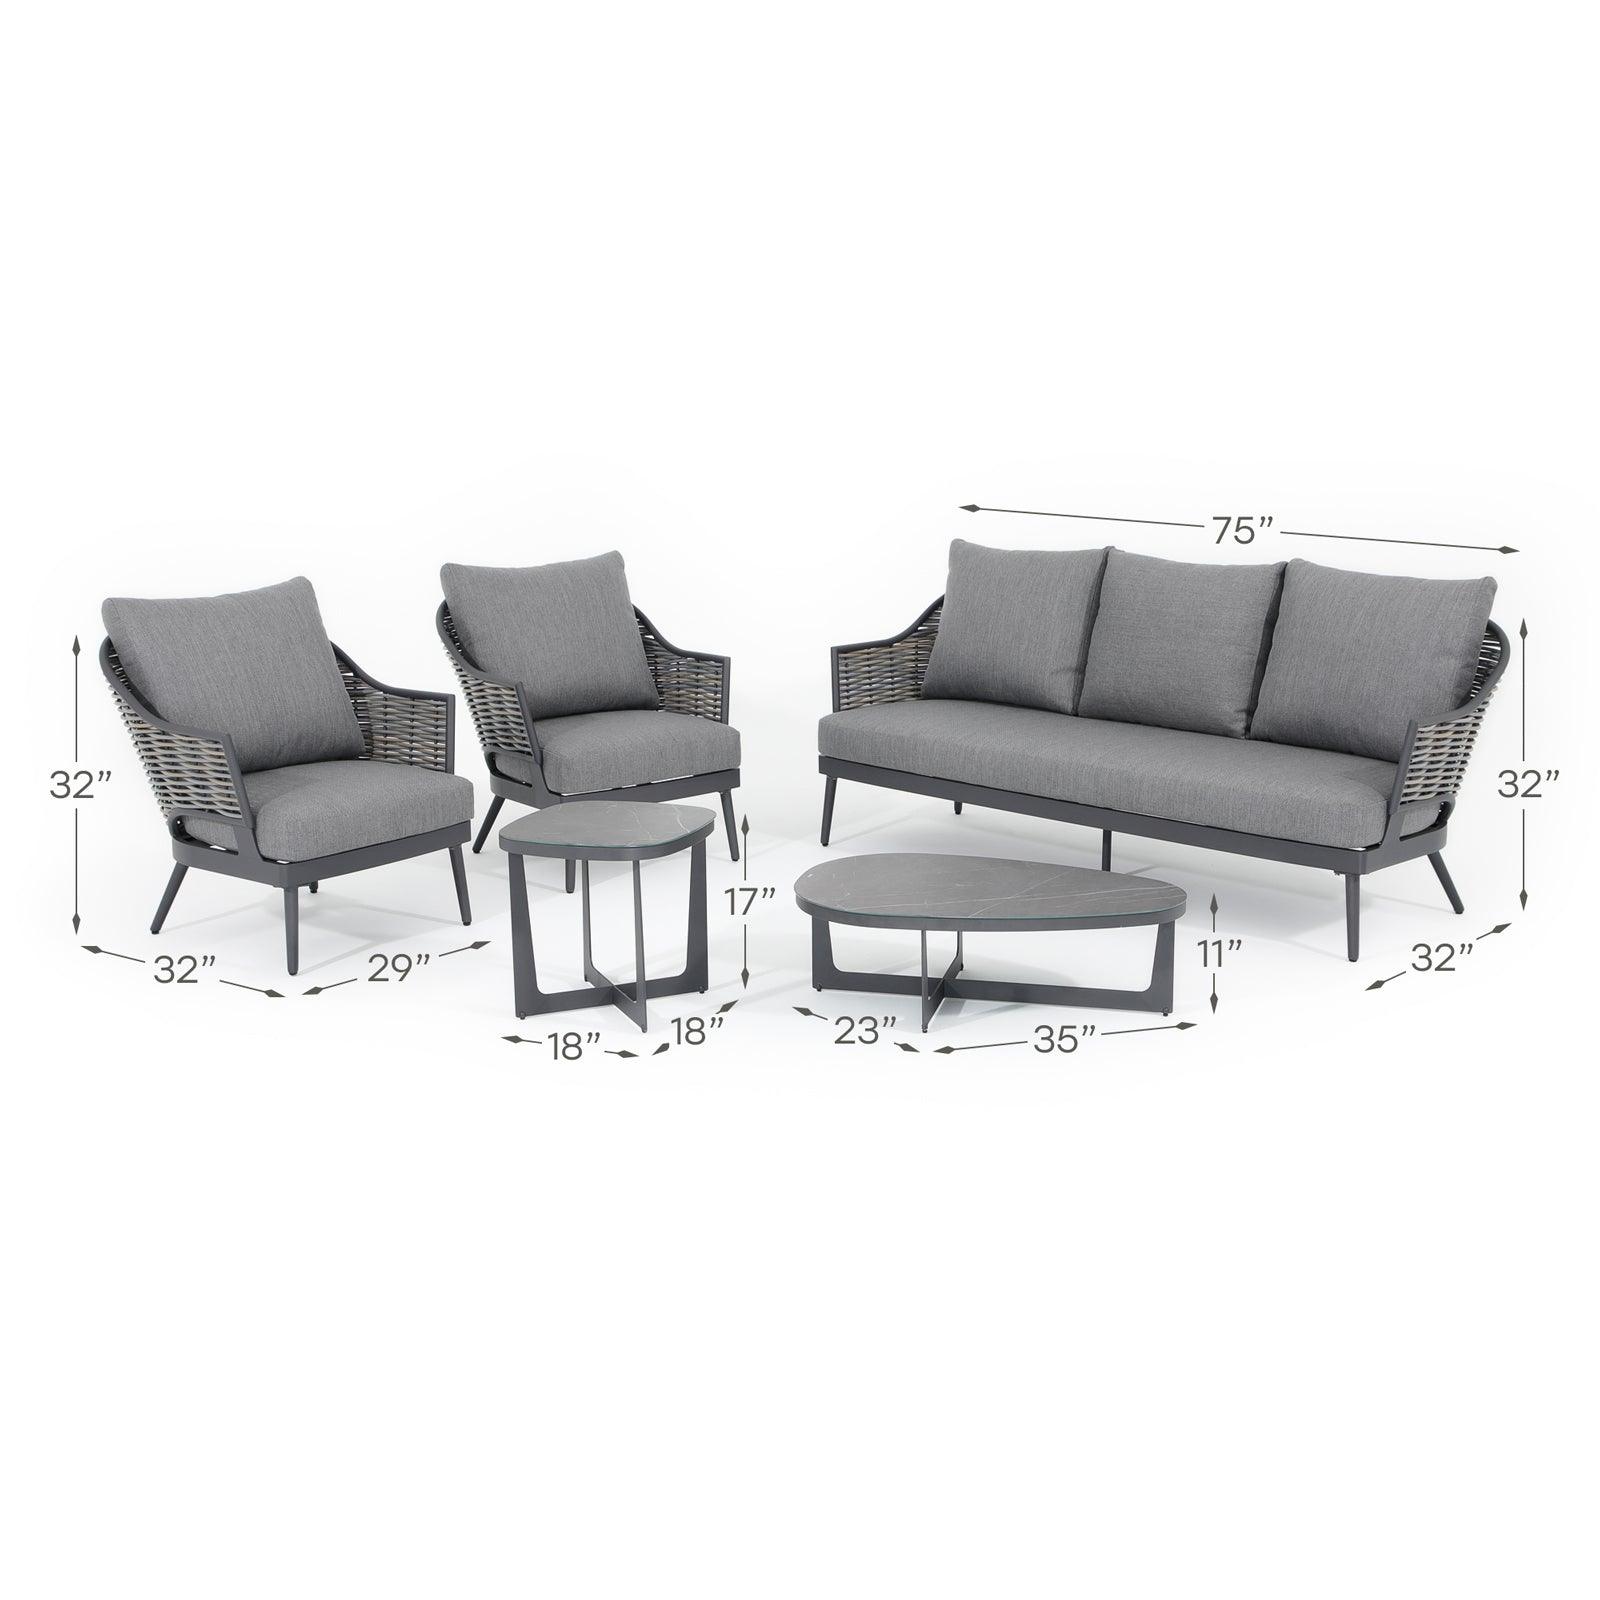 Burano 5-Piece Grey wicker outdoor Sofa Set with aluminum frame, grey cushions, a three-seater sofa, 2 arm chairs , 1 mixed set of tables, dimension- Jardina Furniture